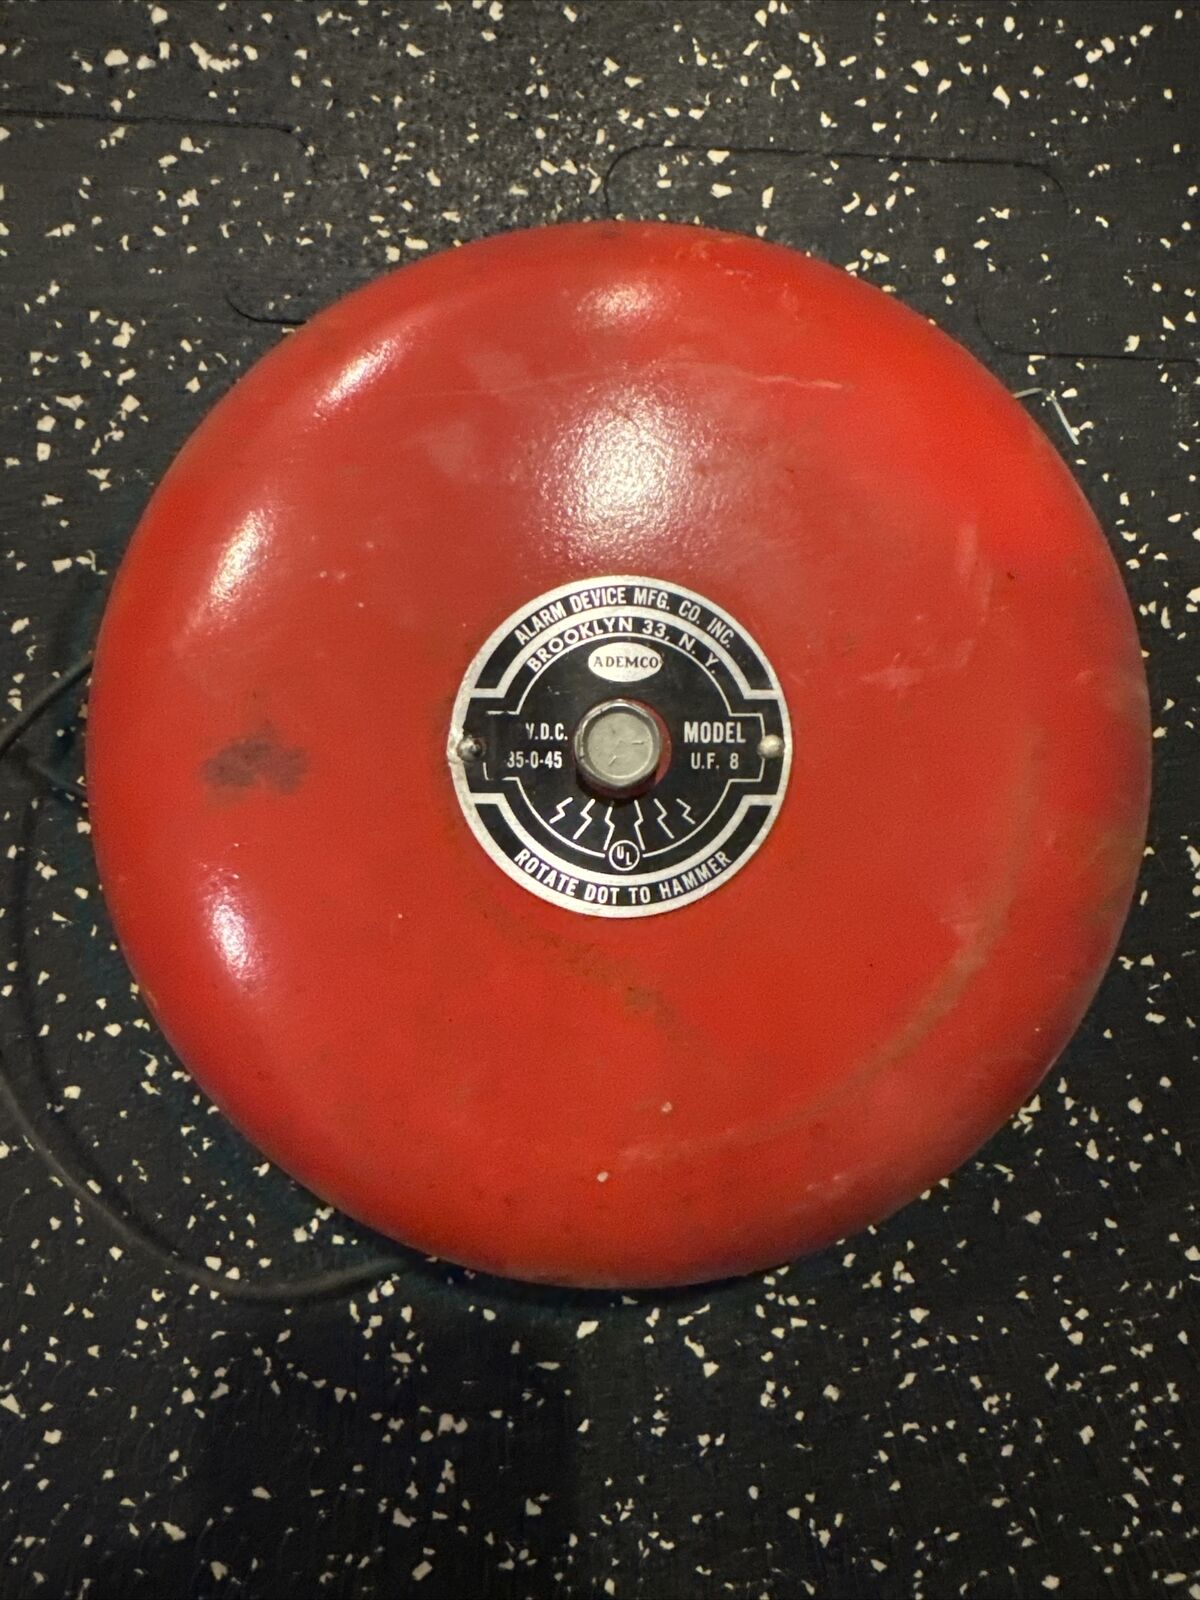 Cool Vintage RED BELL Alarm BROOKLYN 33, NY ADEMCO UF-8